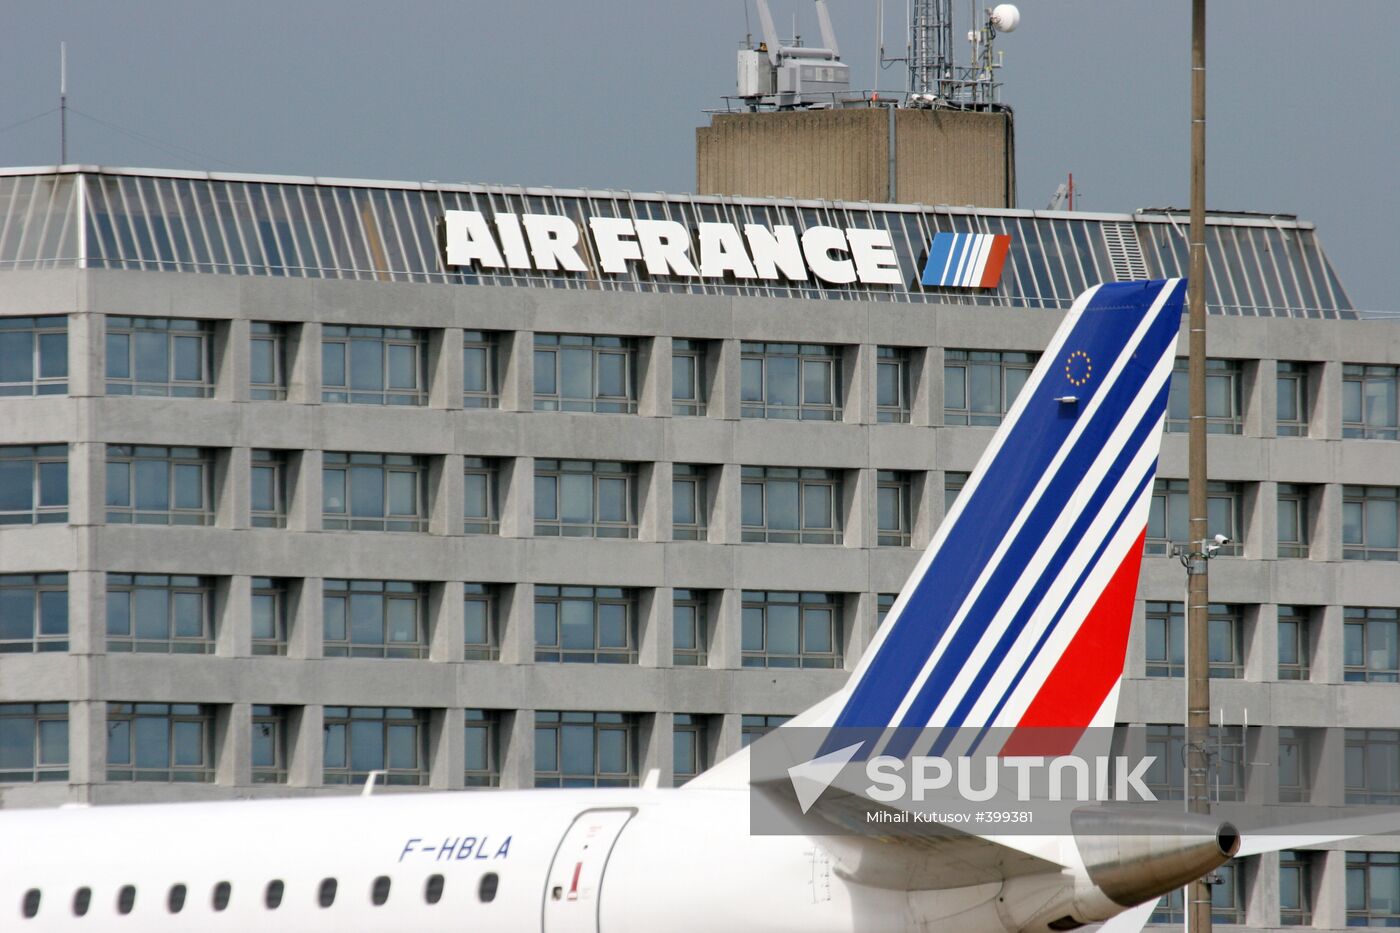 Air France passenger airliners